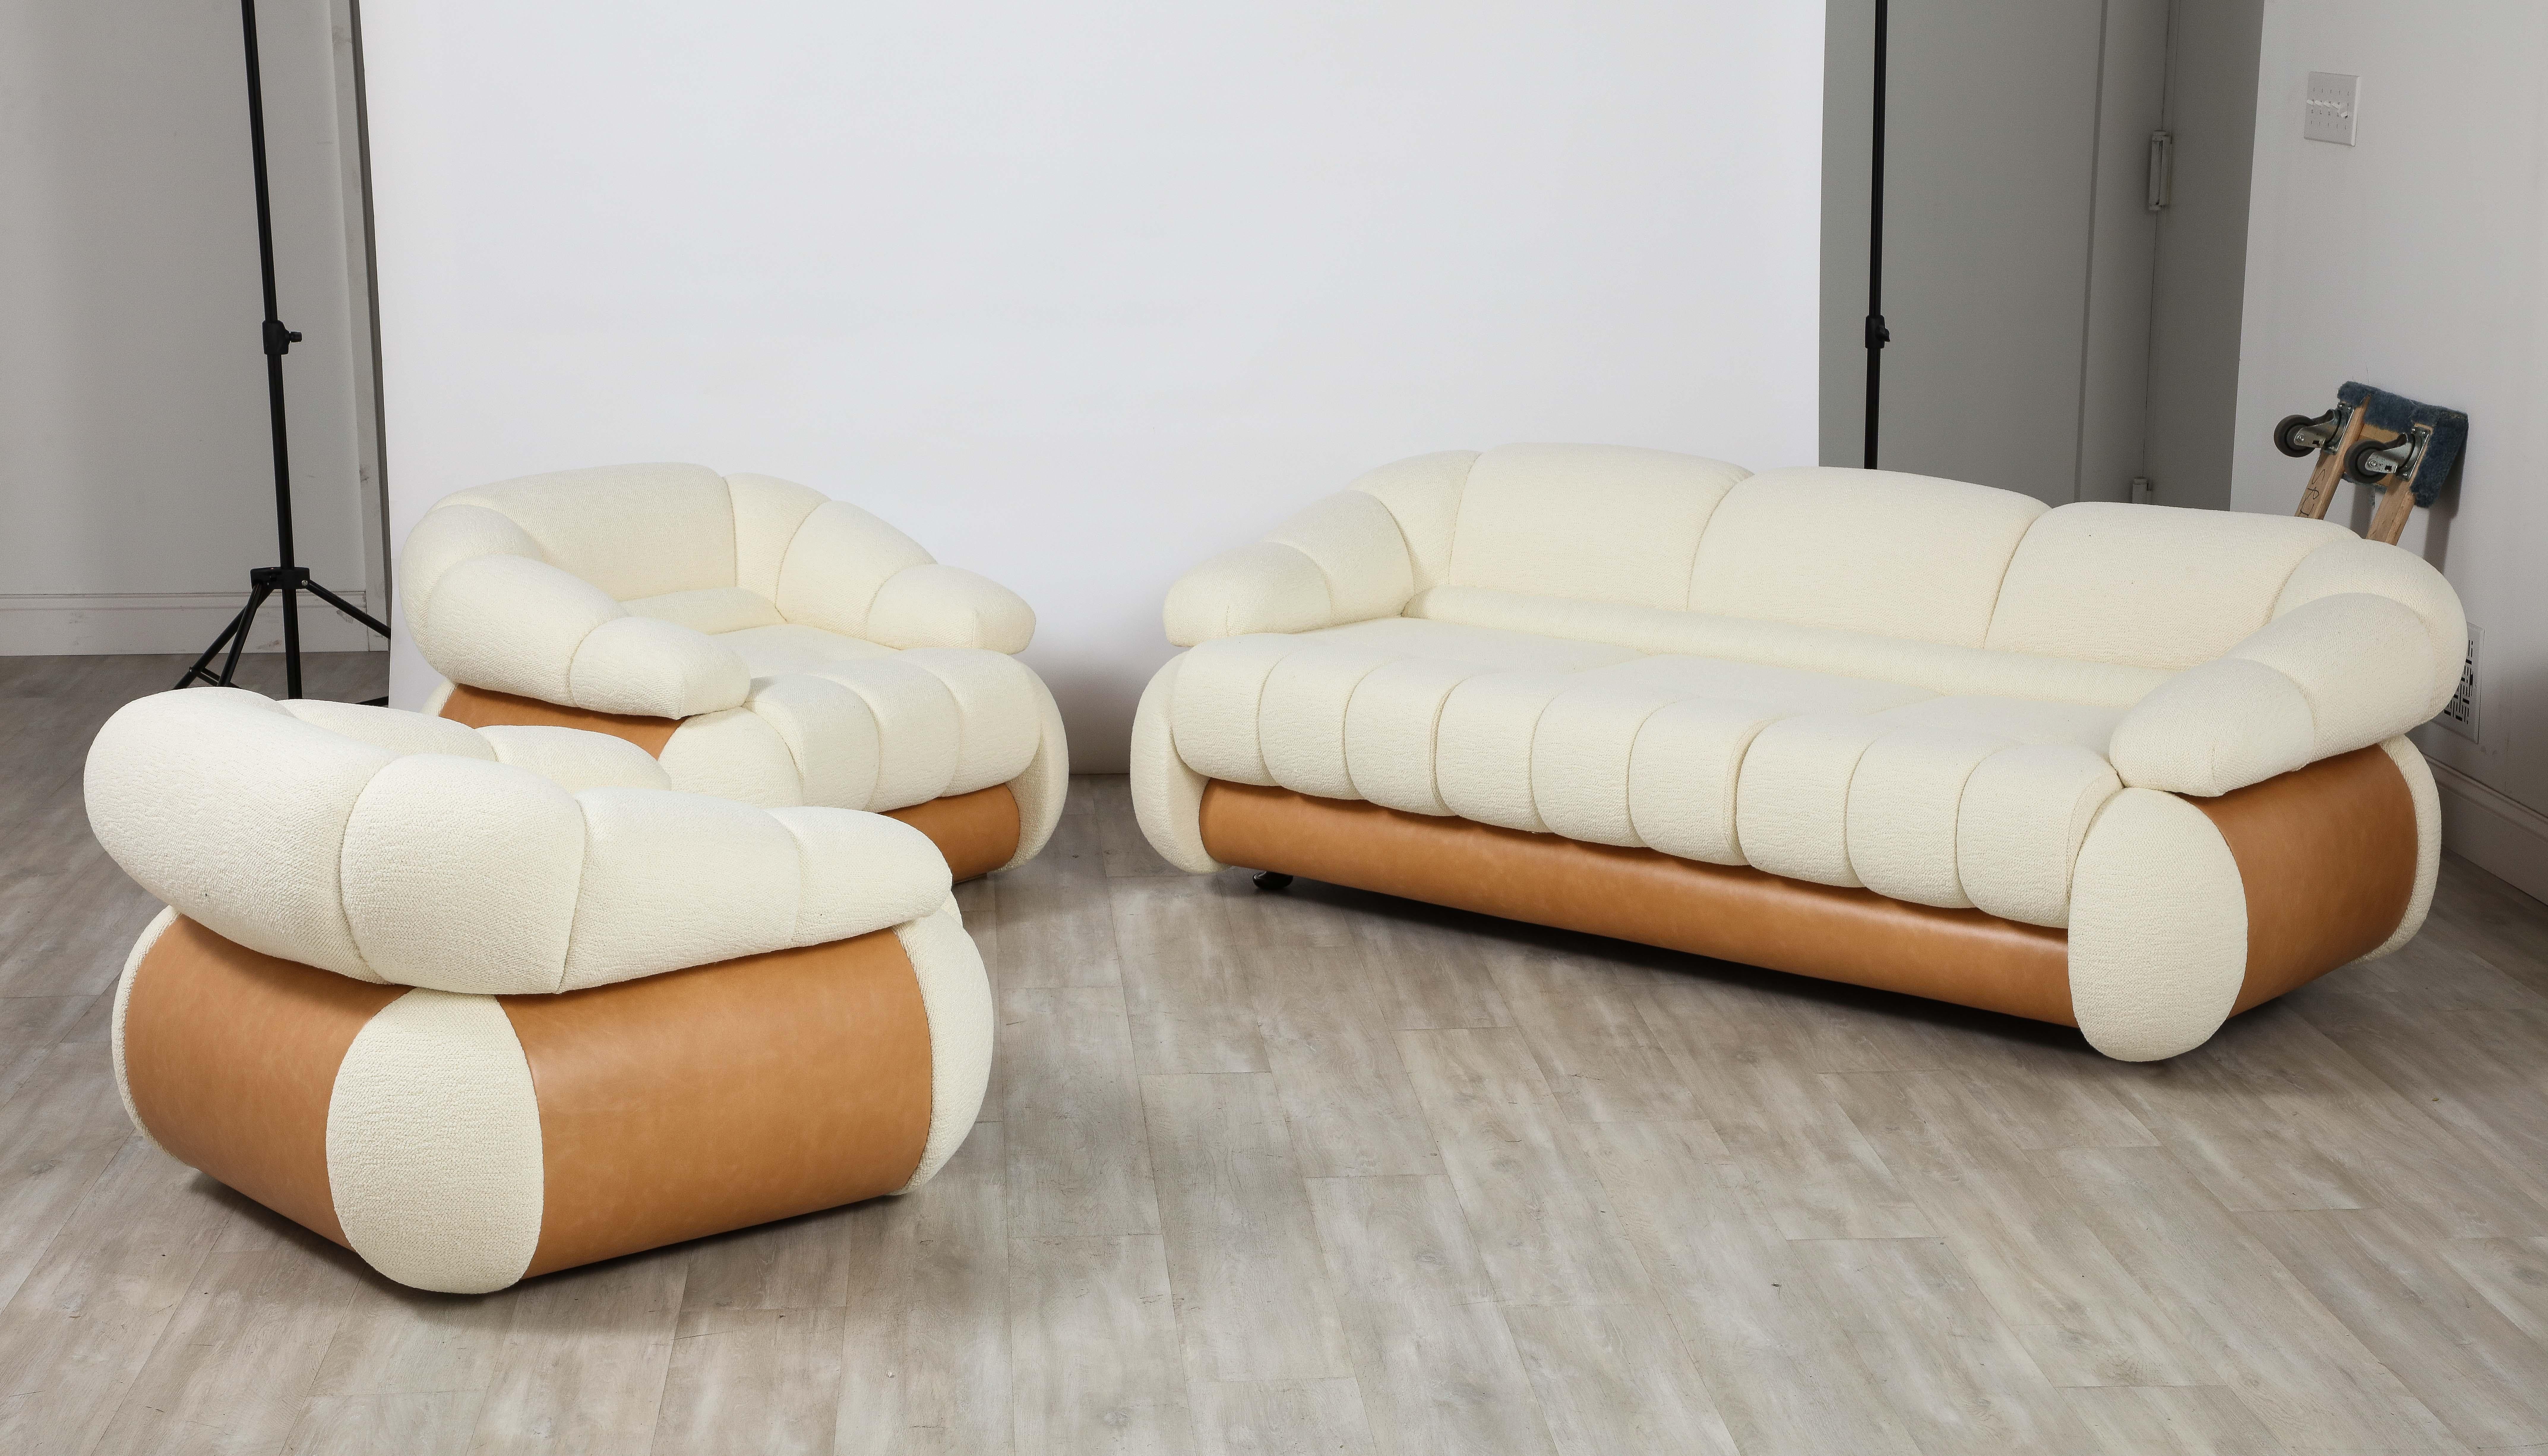 Adriano Piazzesi Italian 1970's Channel Tufted Sofa For Sale 6